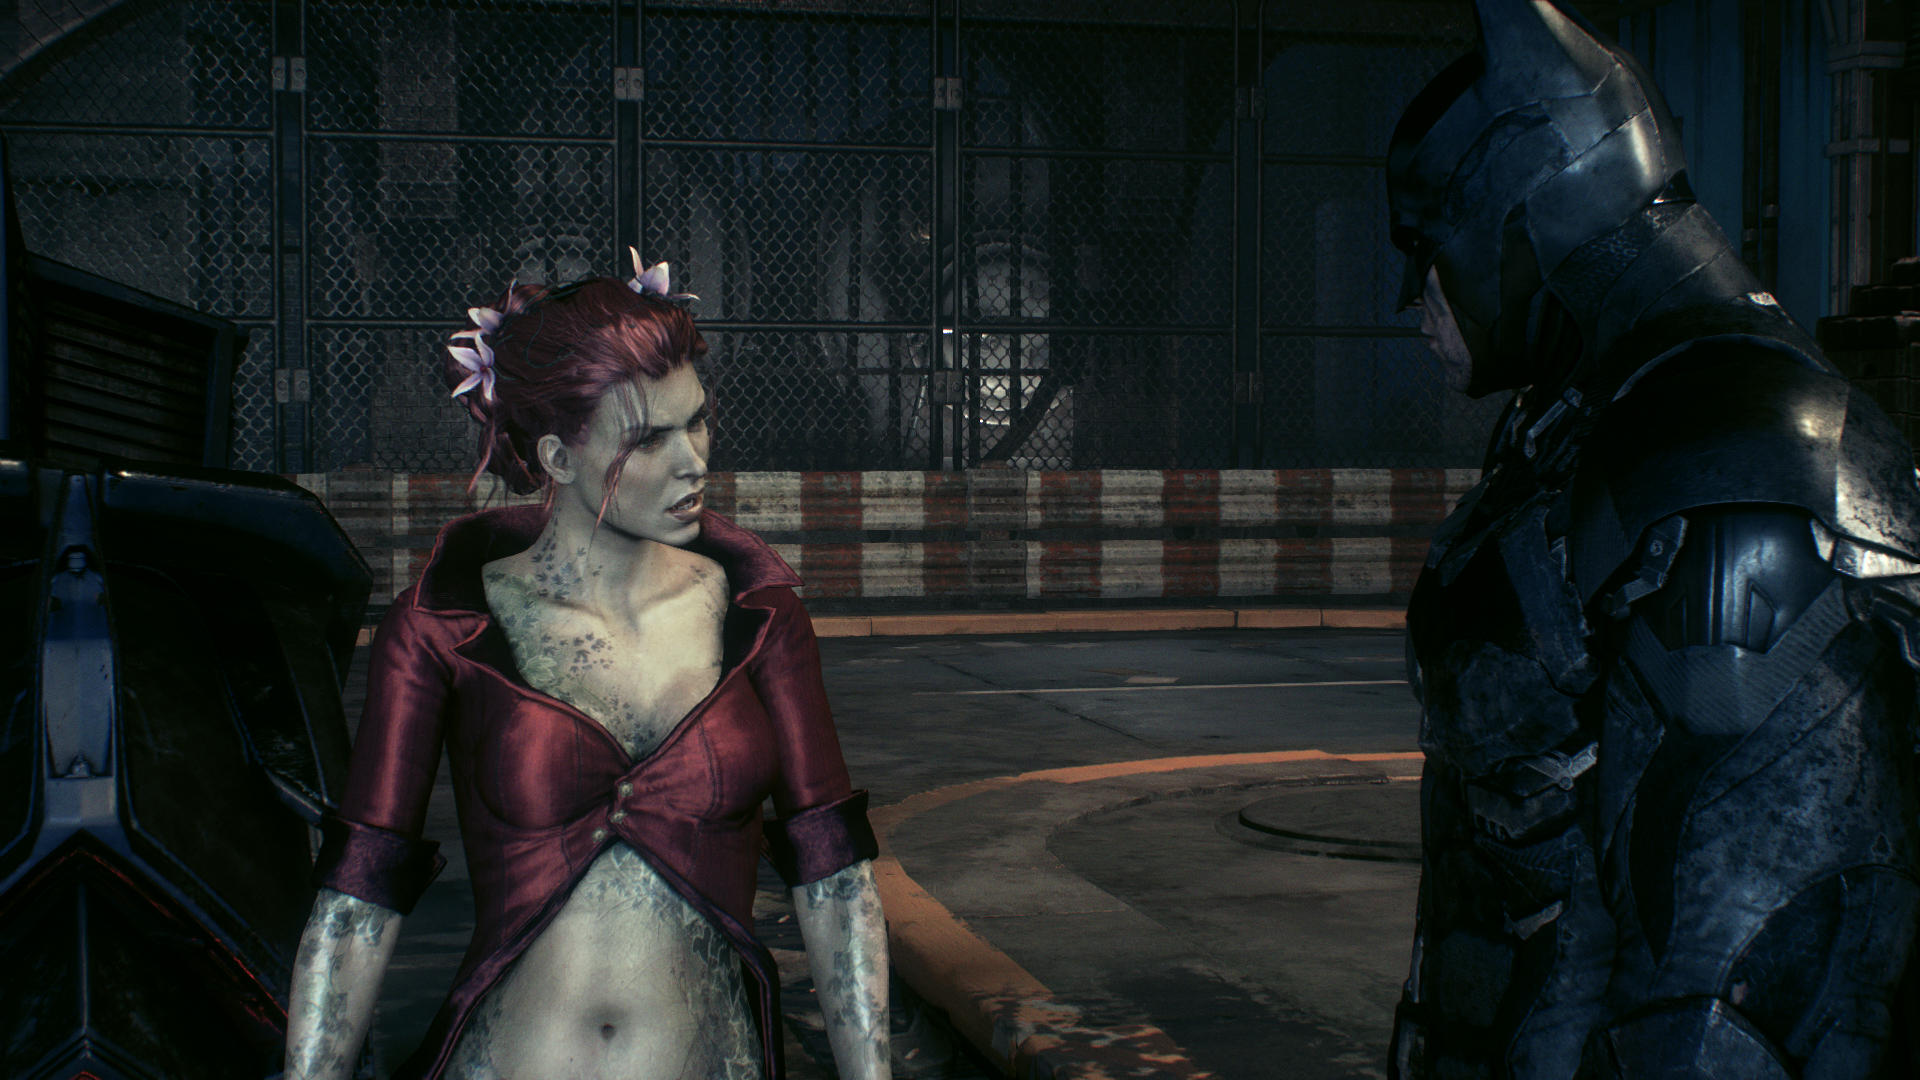 Batman and Poison Ivy talking